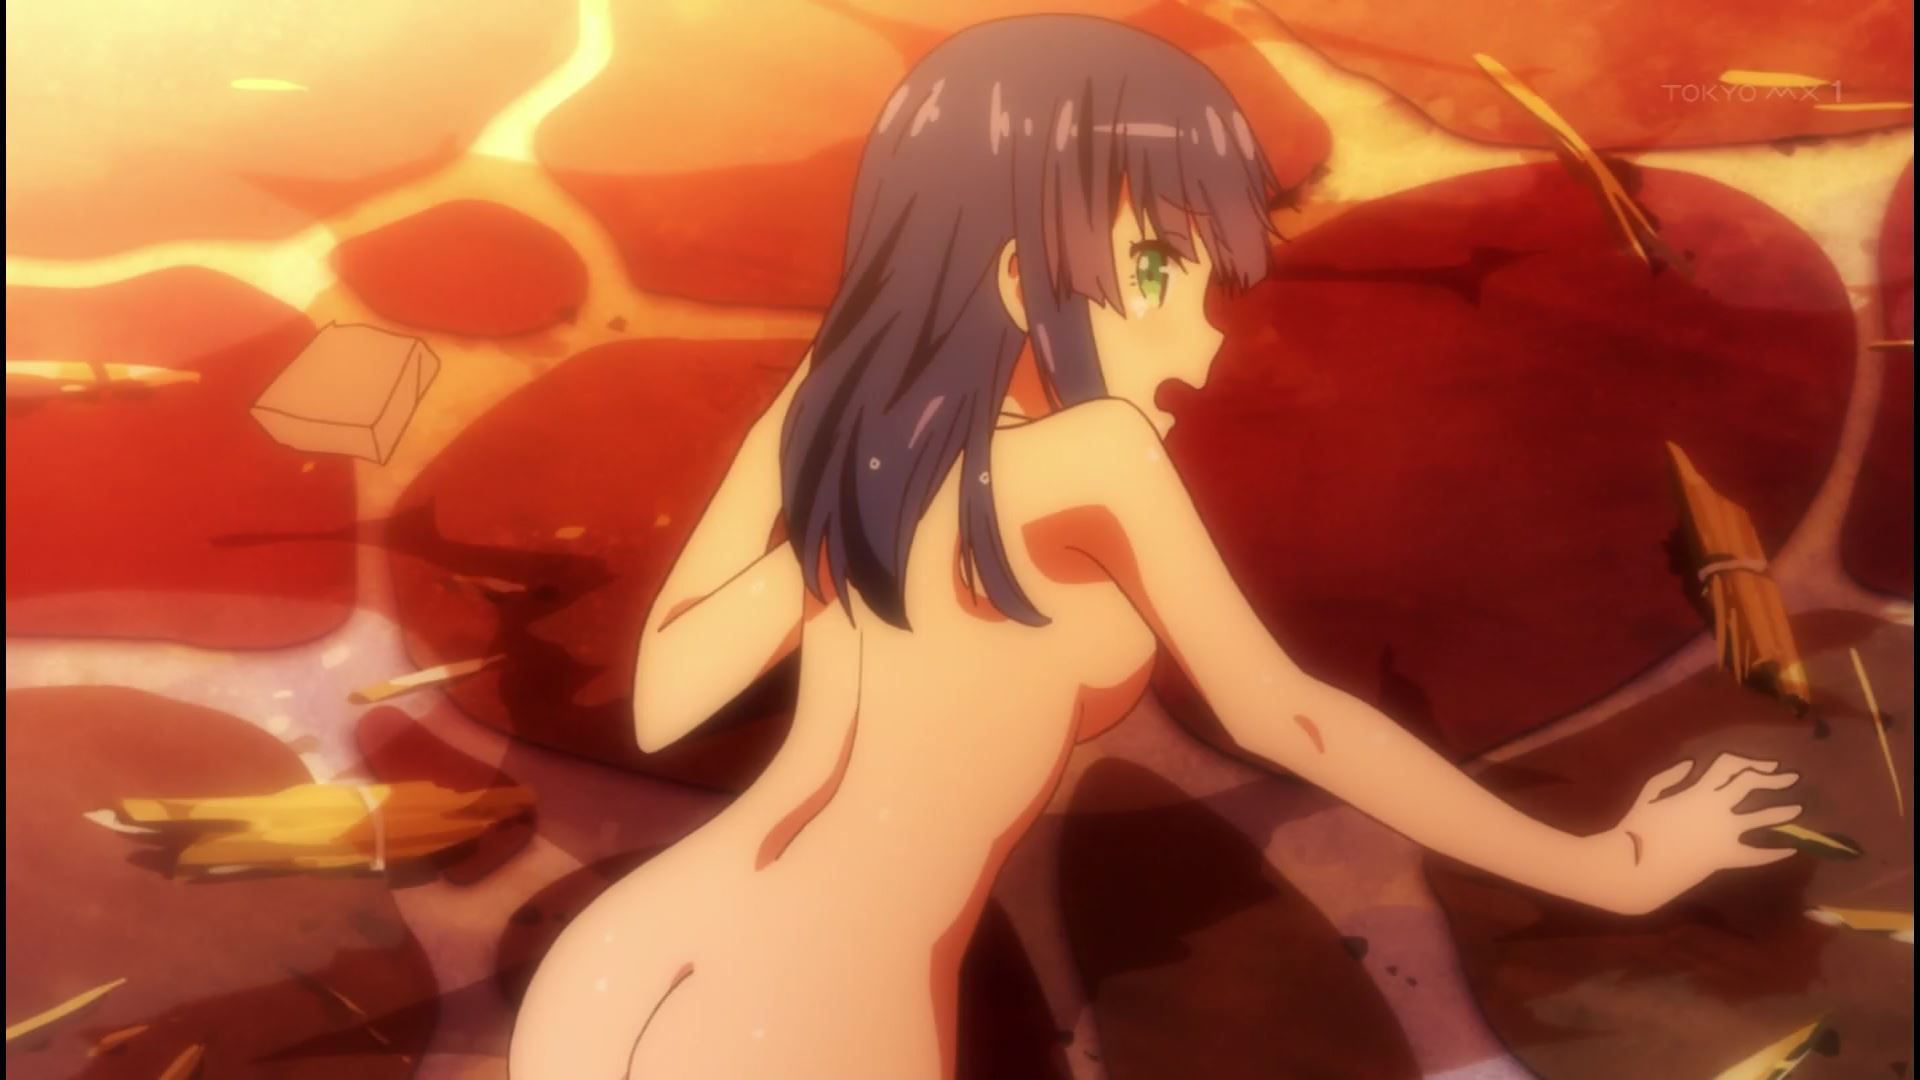 Erotic scene to Scurry in the nude full view of the girl in the anime [fairytale hen] 1 story! 8